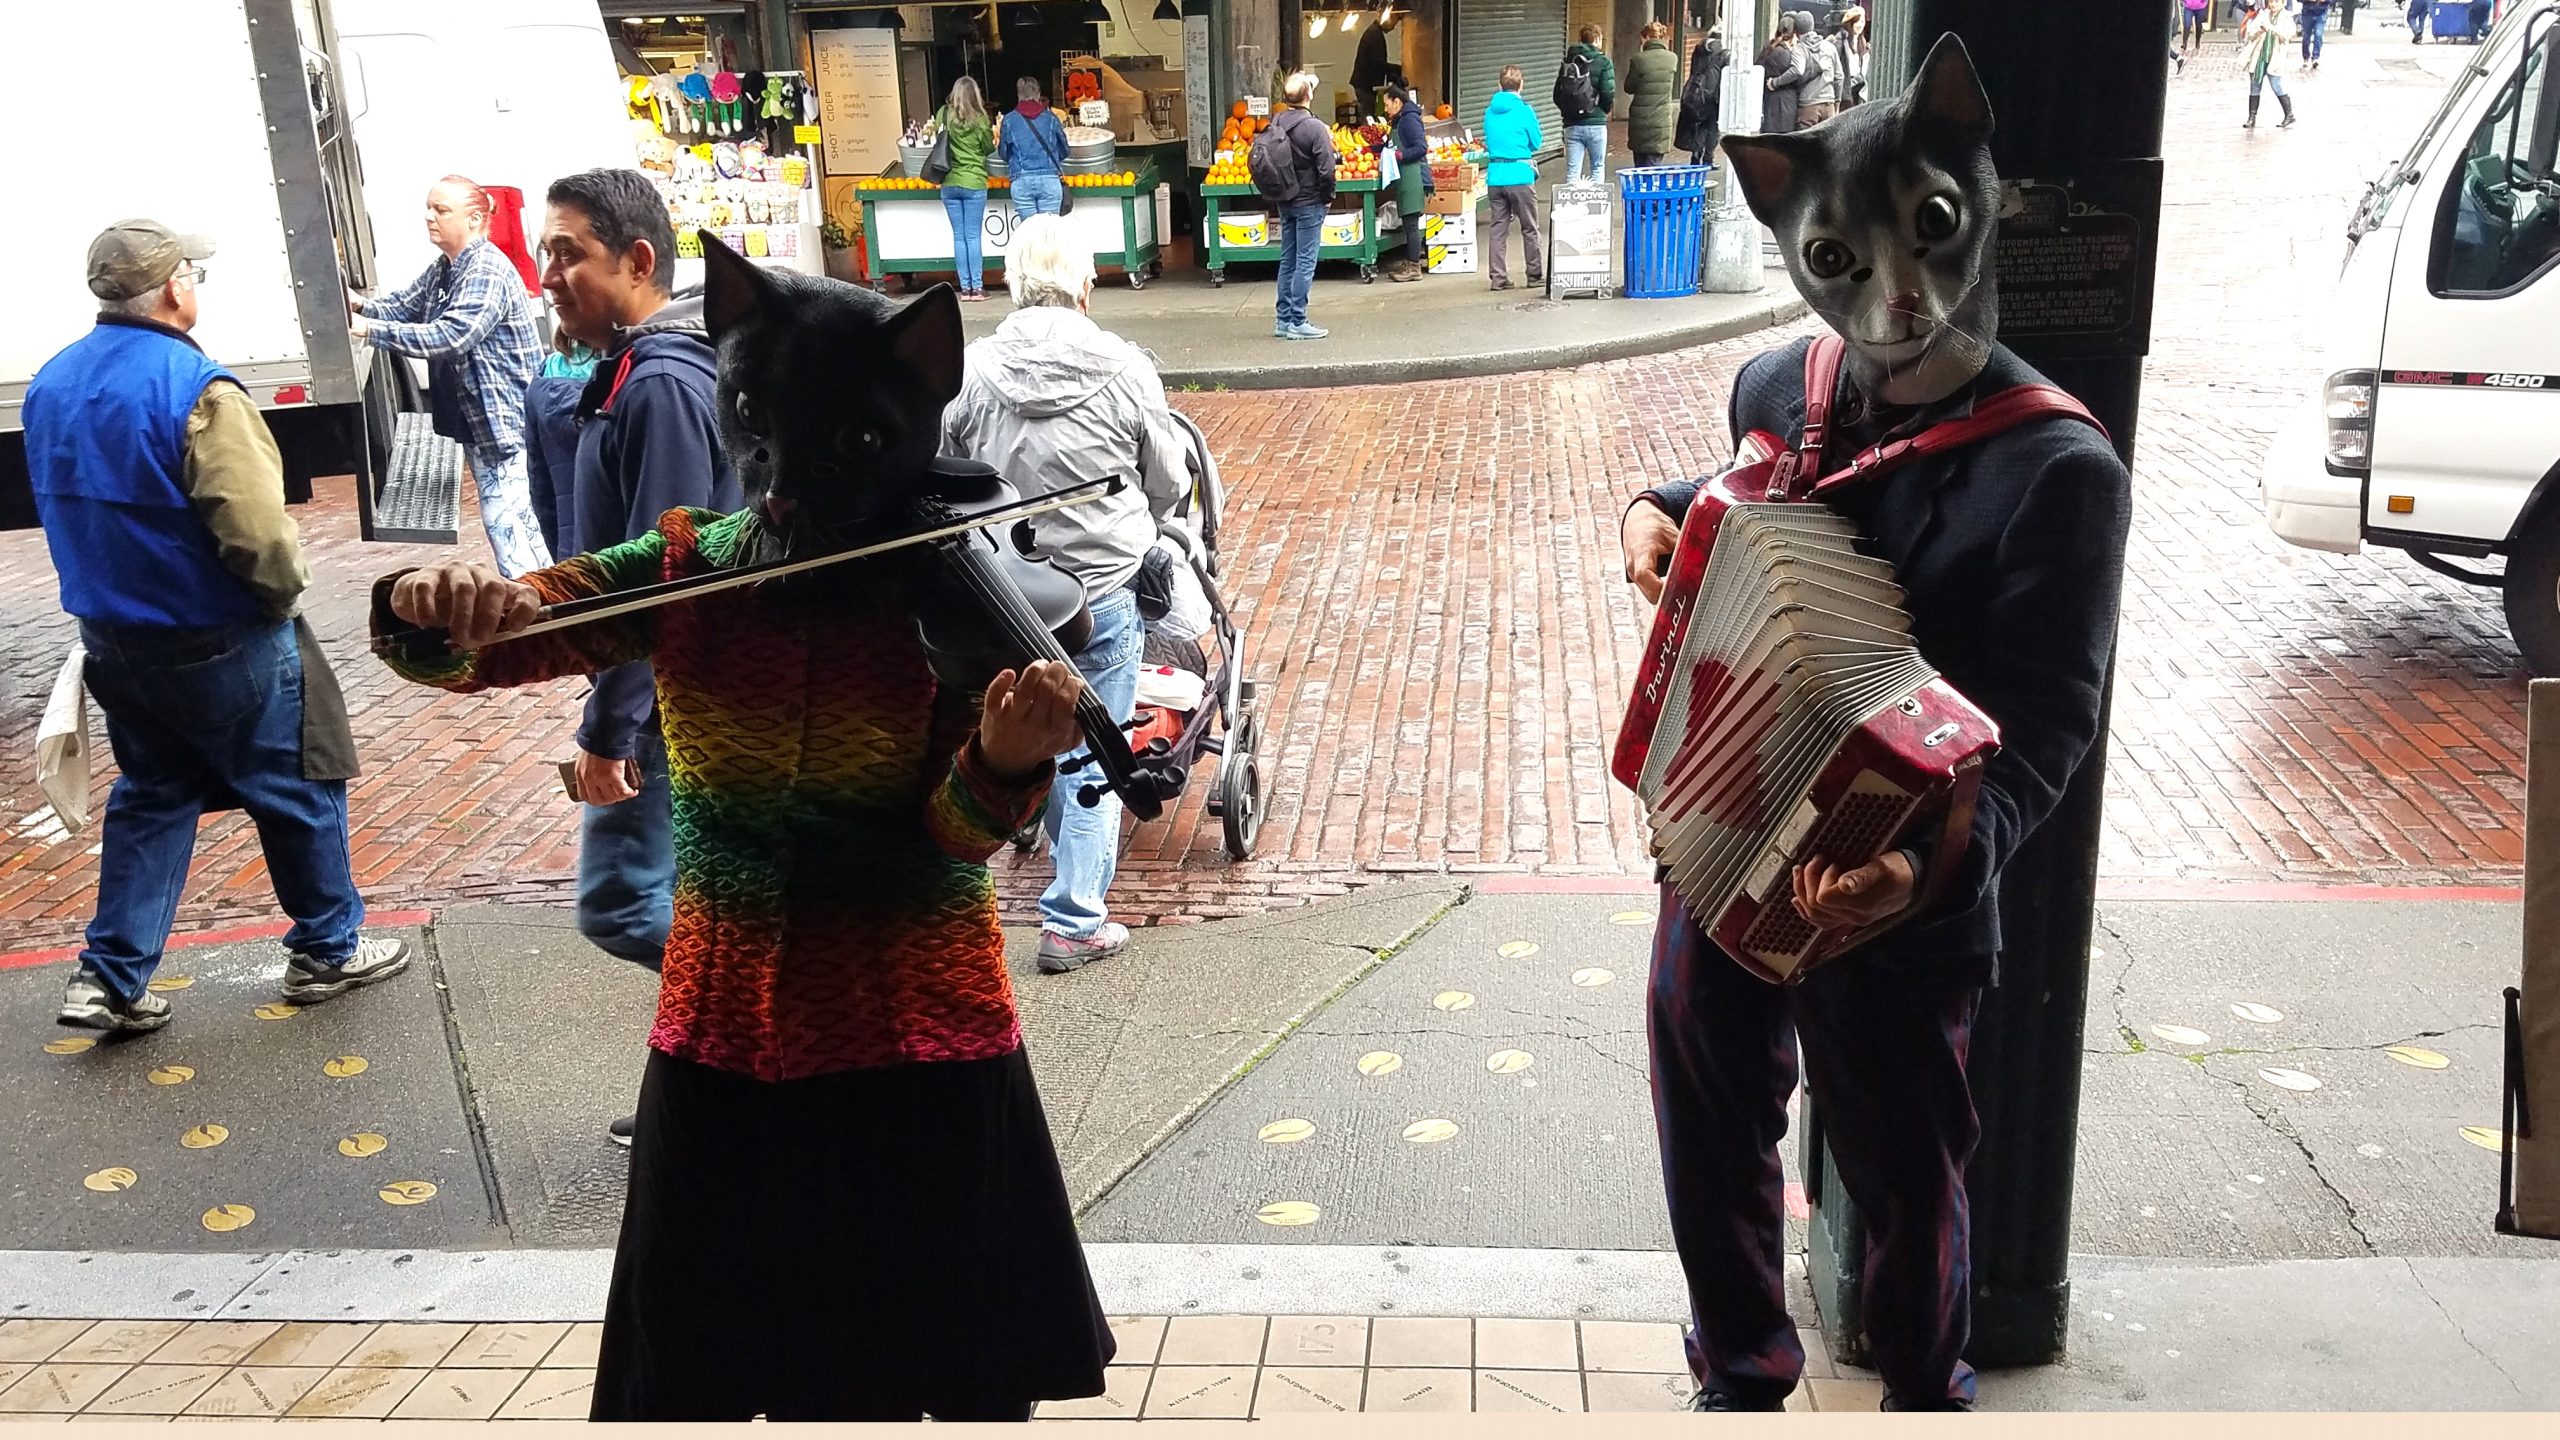 You never know who you'll run into at Pike's Place market.